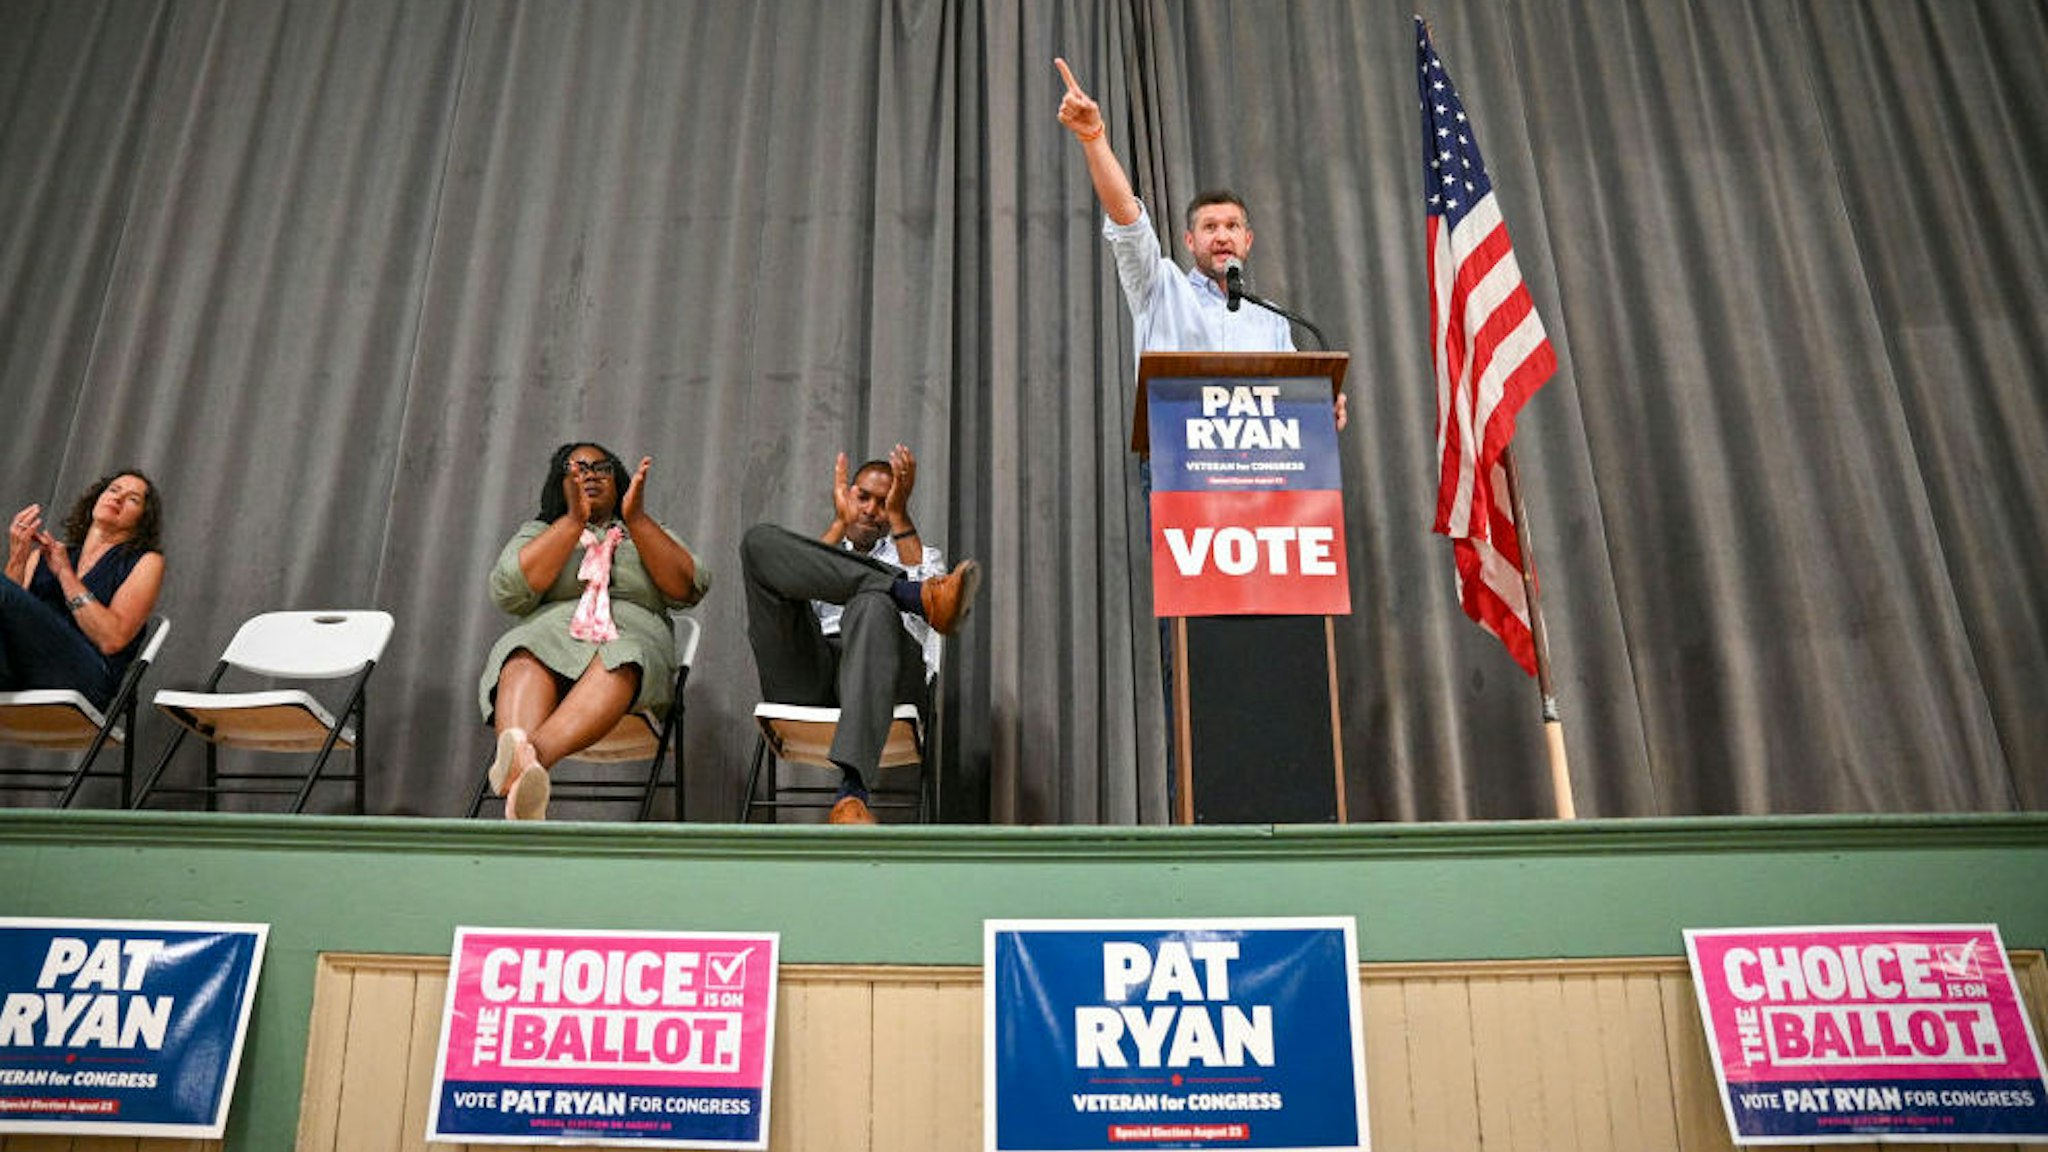 Democratic candidate Pat Ryan, right, speaks during a rally in Kingston, New York on Saturday, Aug. 13, 2022.